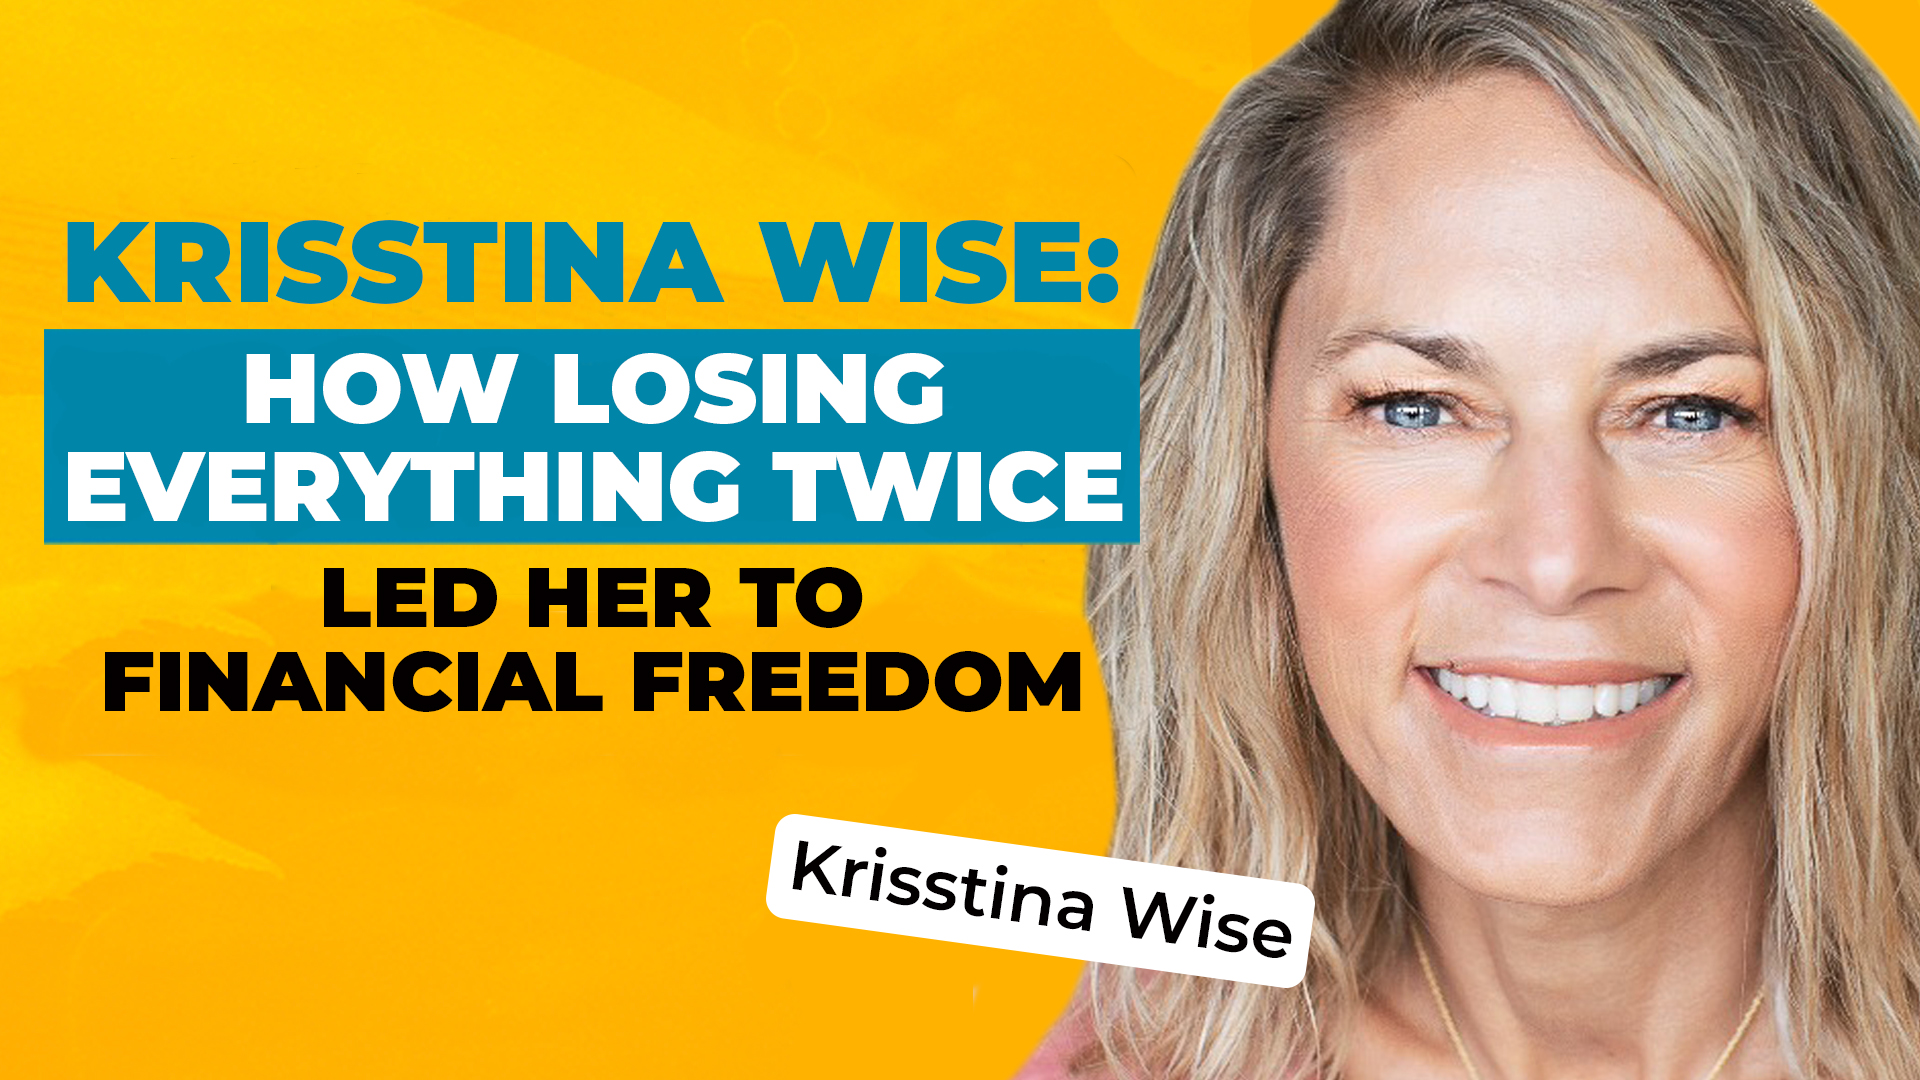 Krisstina Wise: How Losing Everything Twice Led Her to Financial Freedom